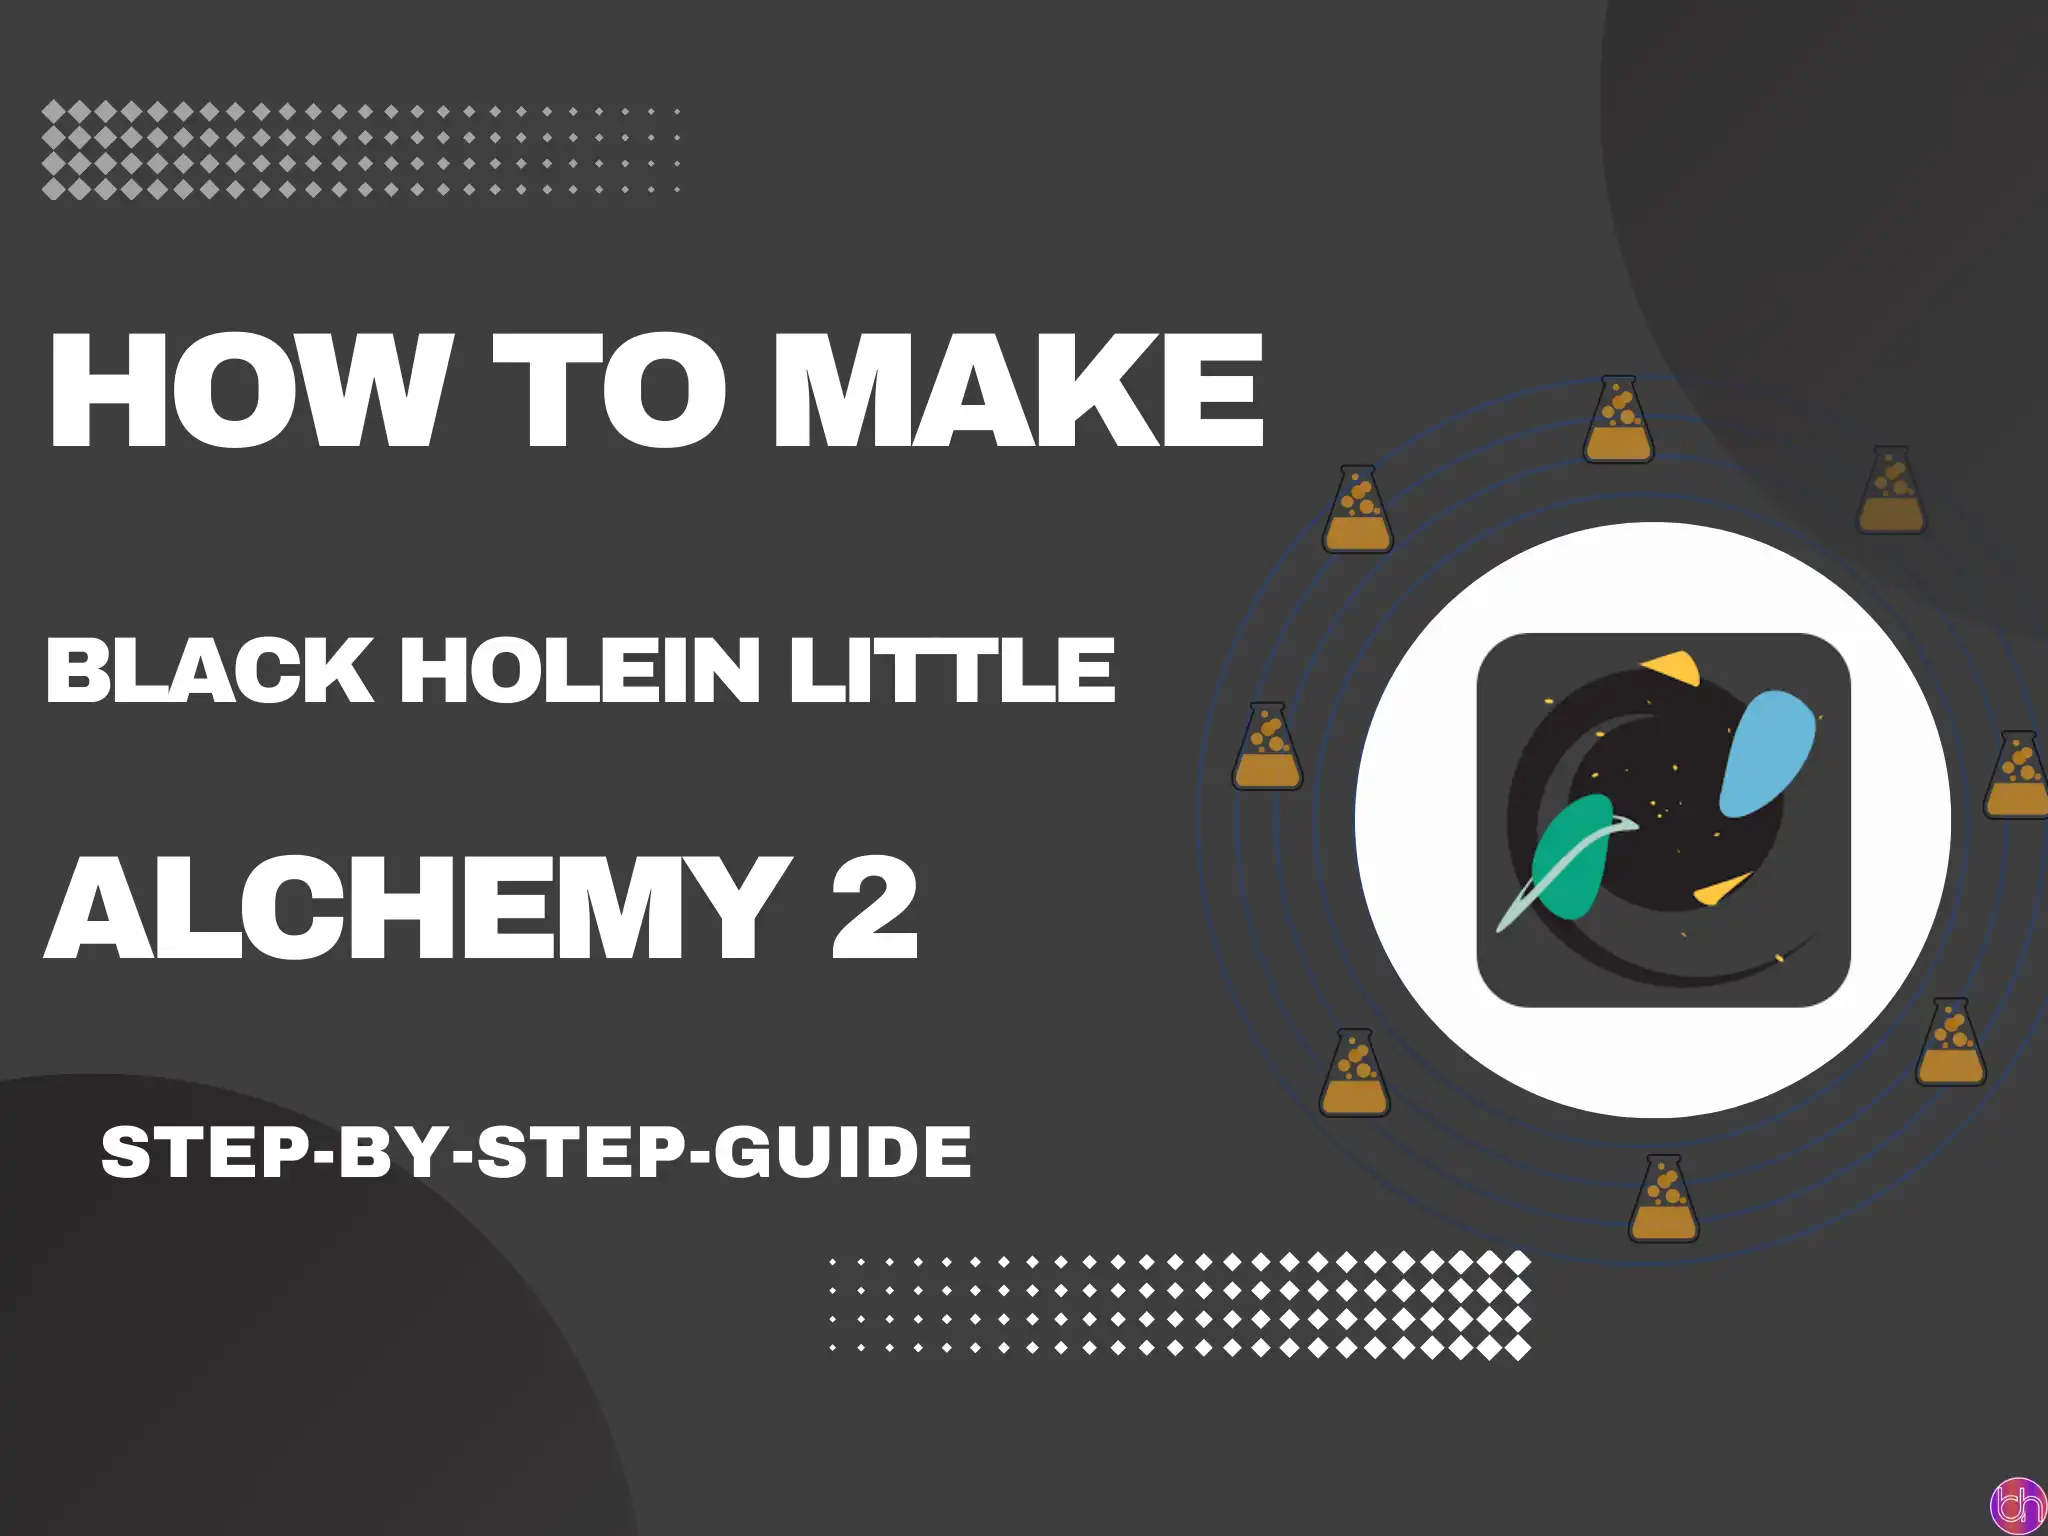 How to make Black Hole in Little Alchemy 2